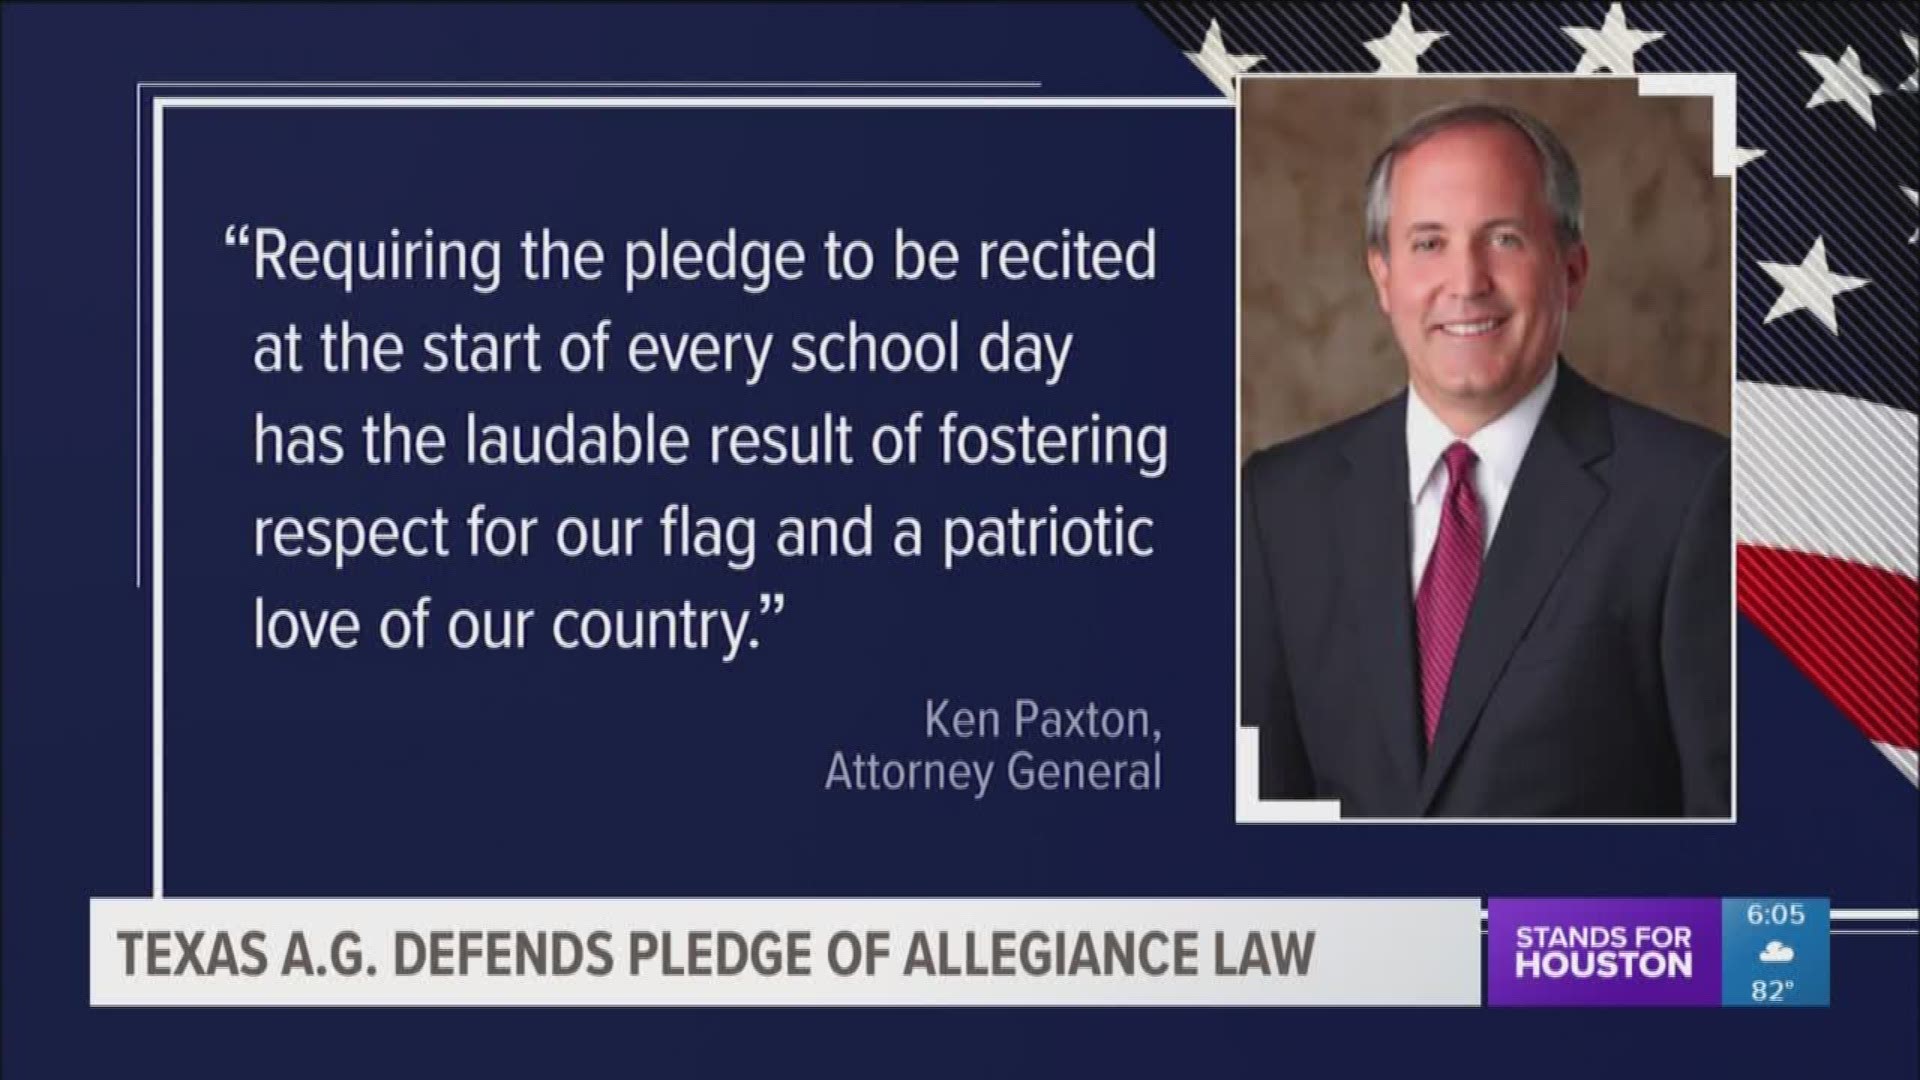 The Texas Attorney General has intervened in a lawsuit filed on behalf of a Cy-Fair ISD student who was expelled after refusing to stand during the Pledge of Allegiance